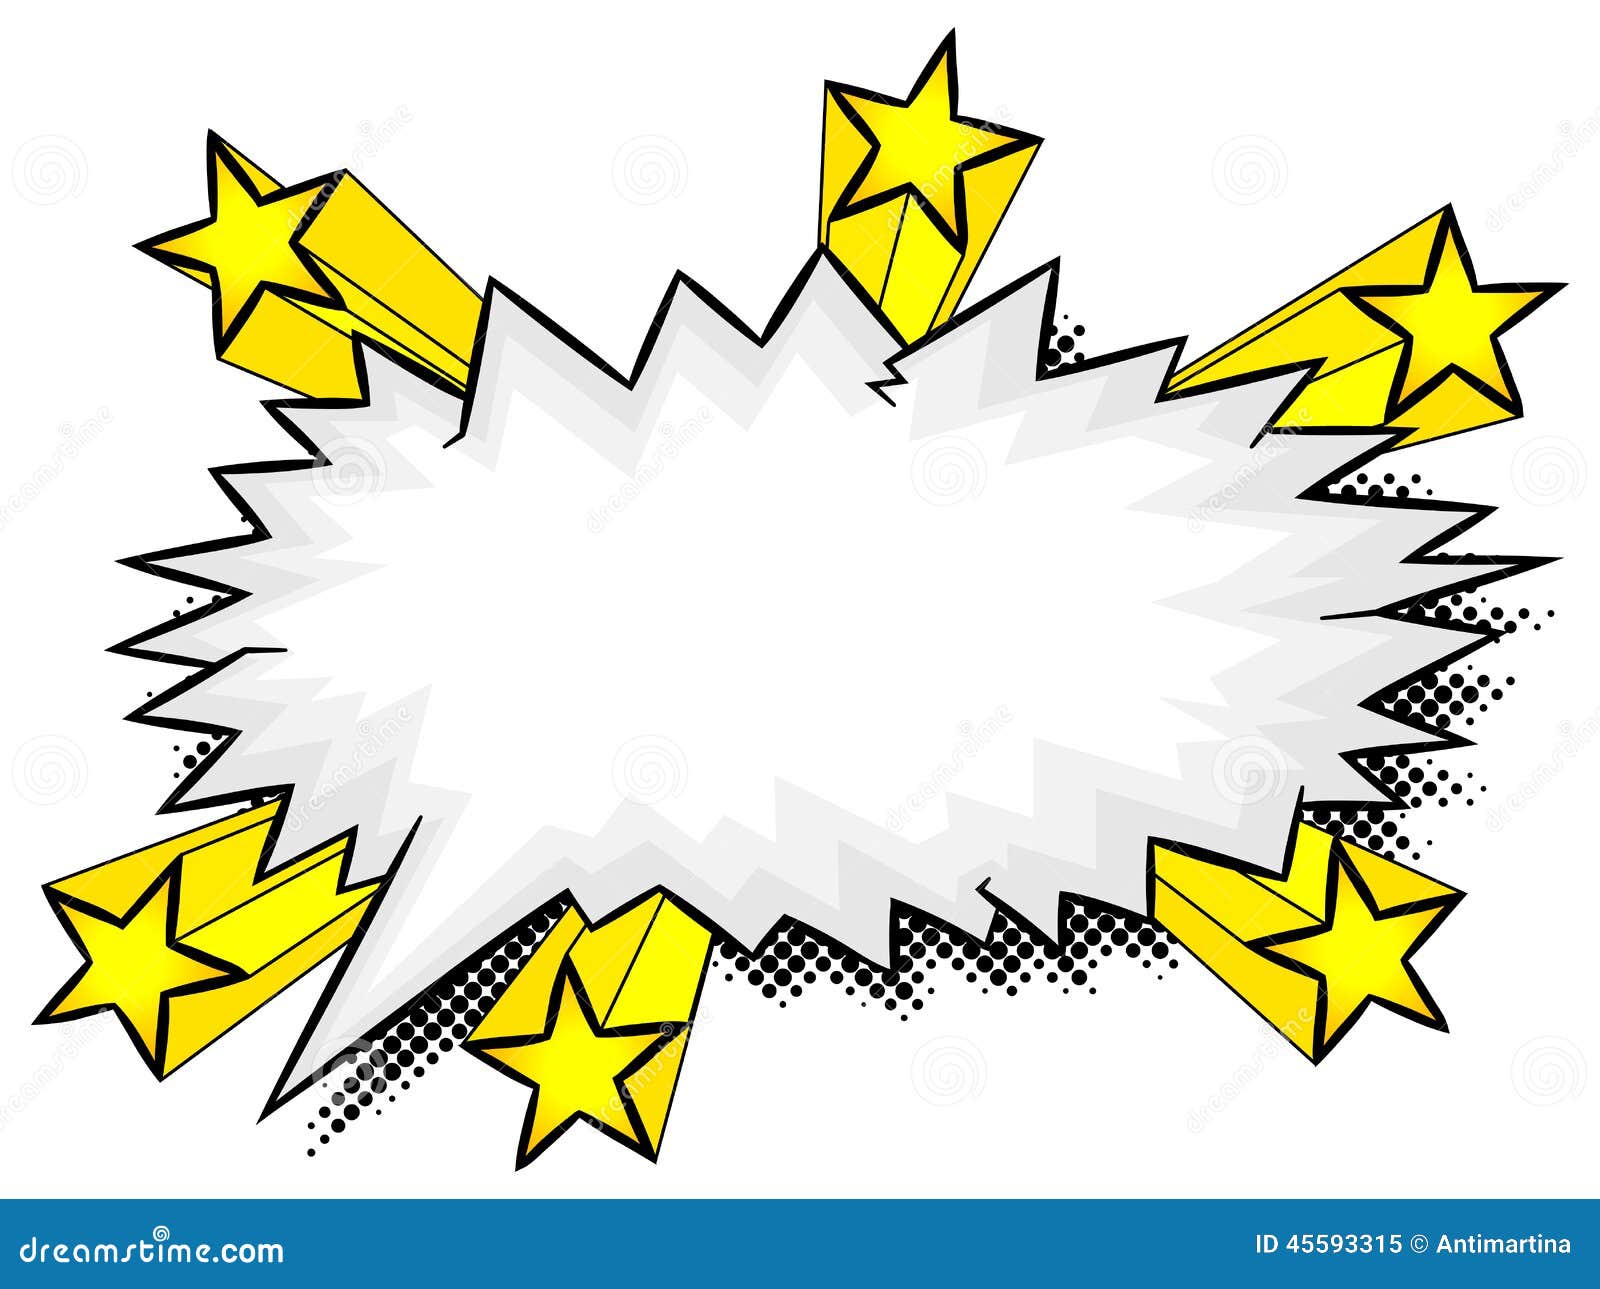 Comic sound effect aargh stock vector. Illustration of blowup - 45593315